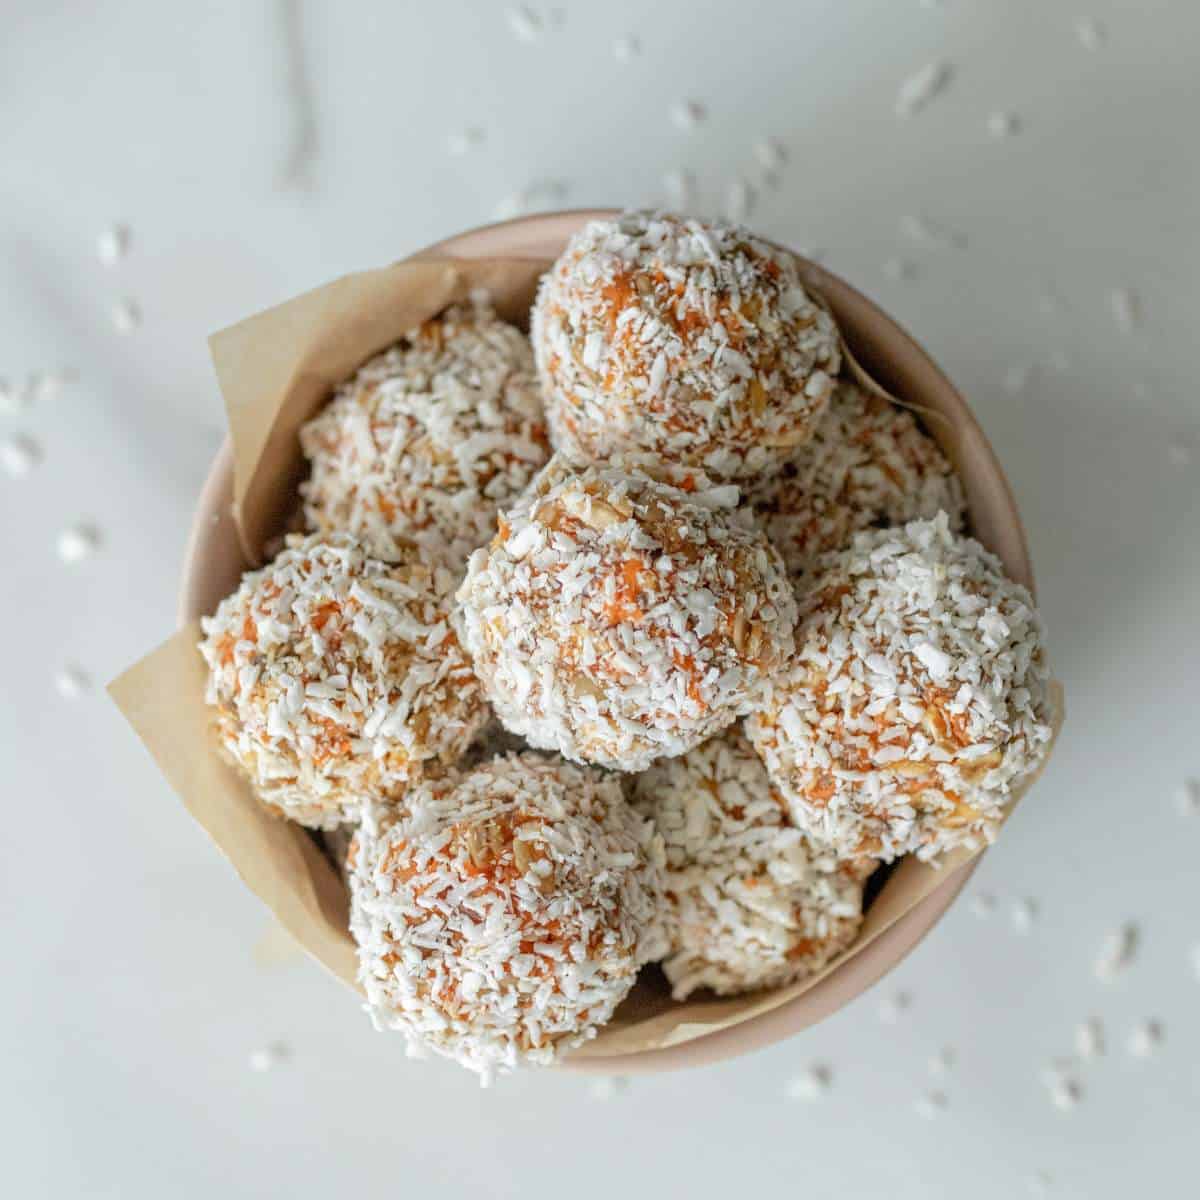 Completed carrot cake energy balls covered in shredded coconut in a small bowl on a countertop.